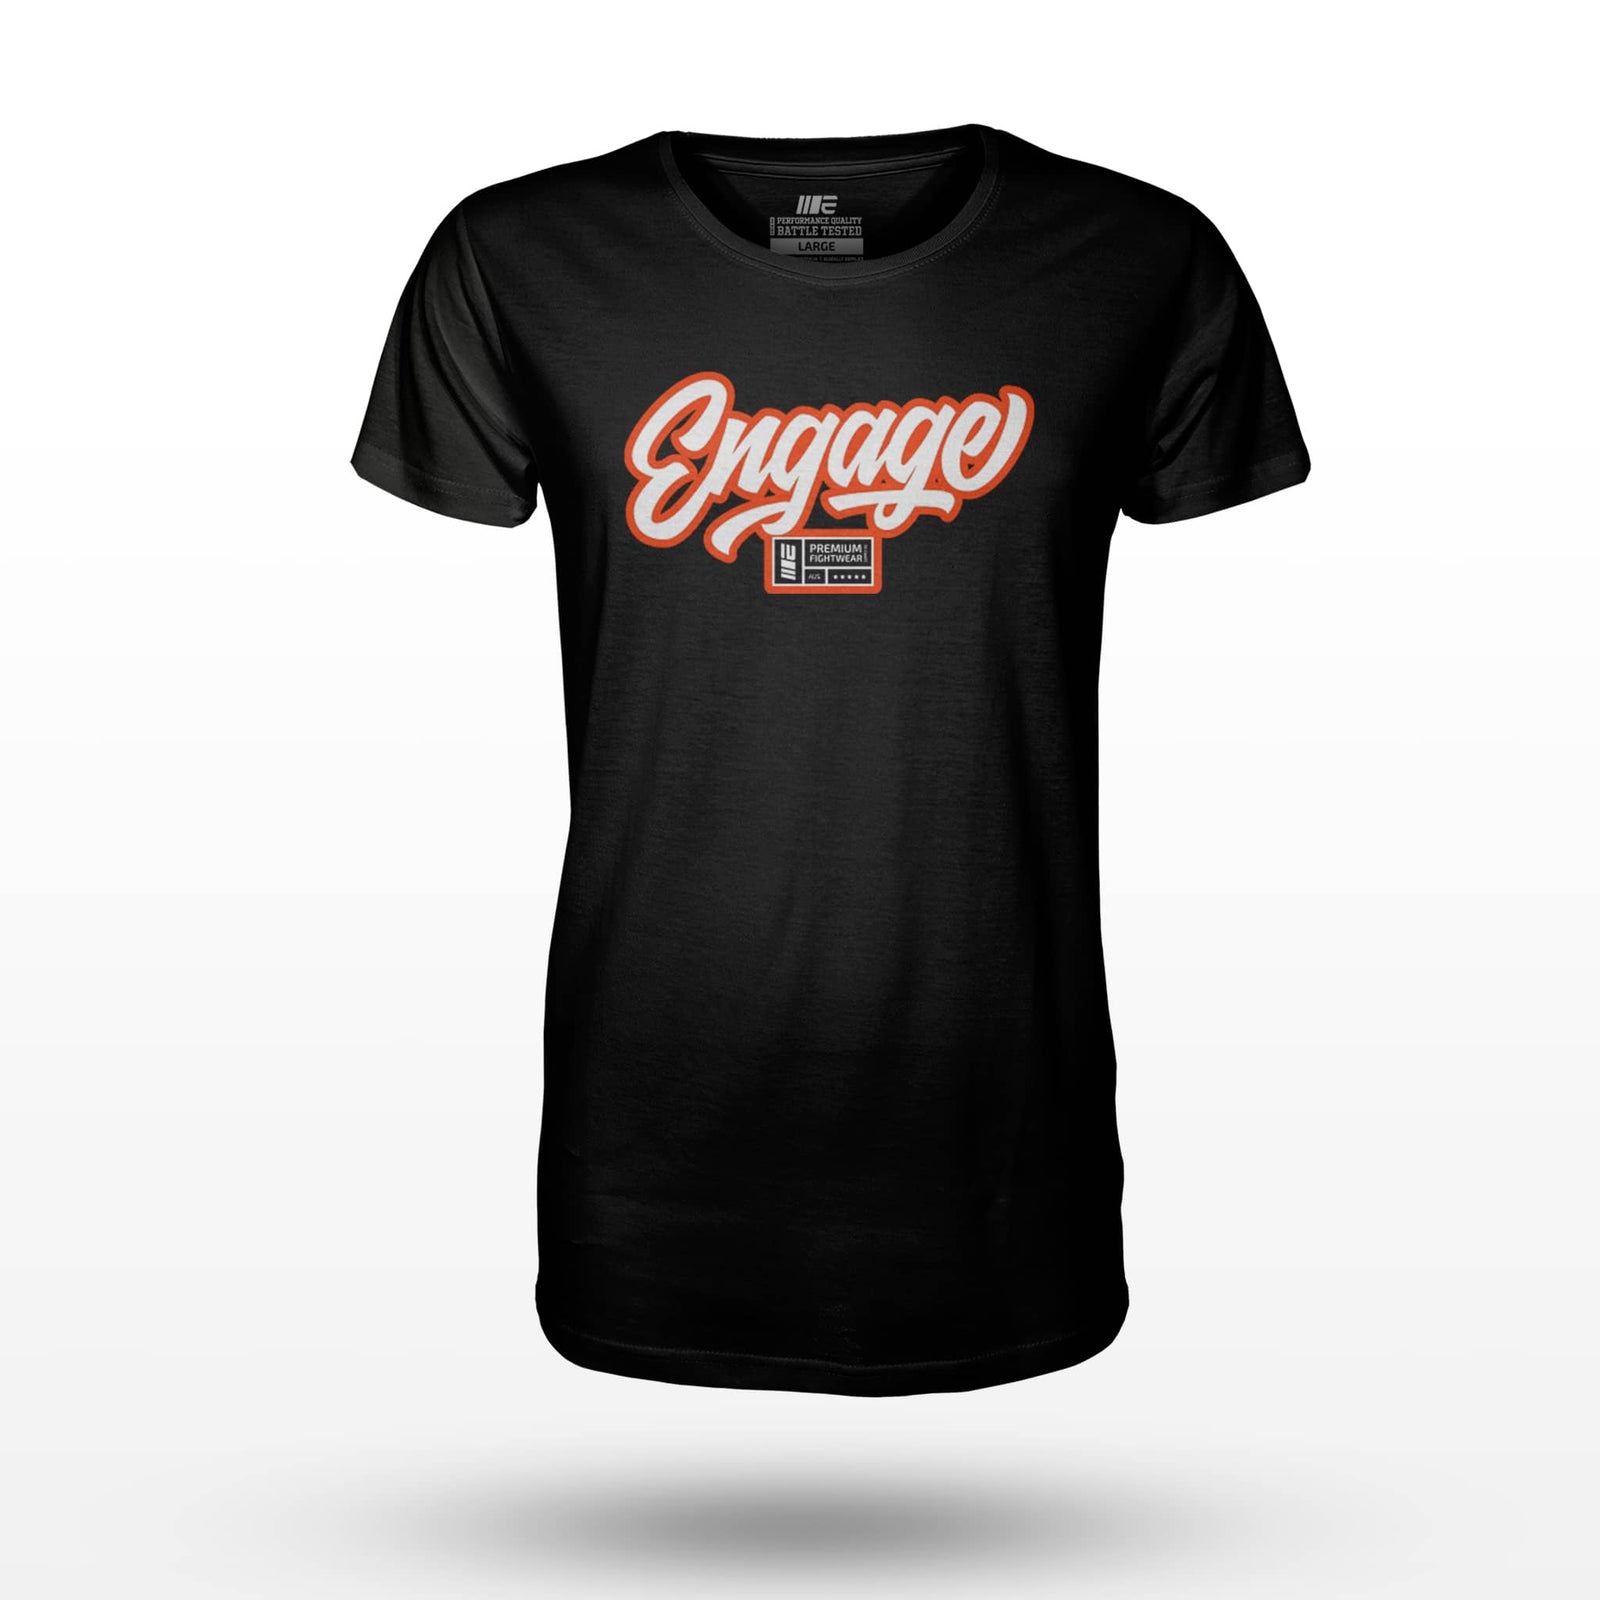 Tees | MMA Apparel: MMA Shirts & Fight Team Supporter T-shirts - Engage®